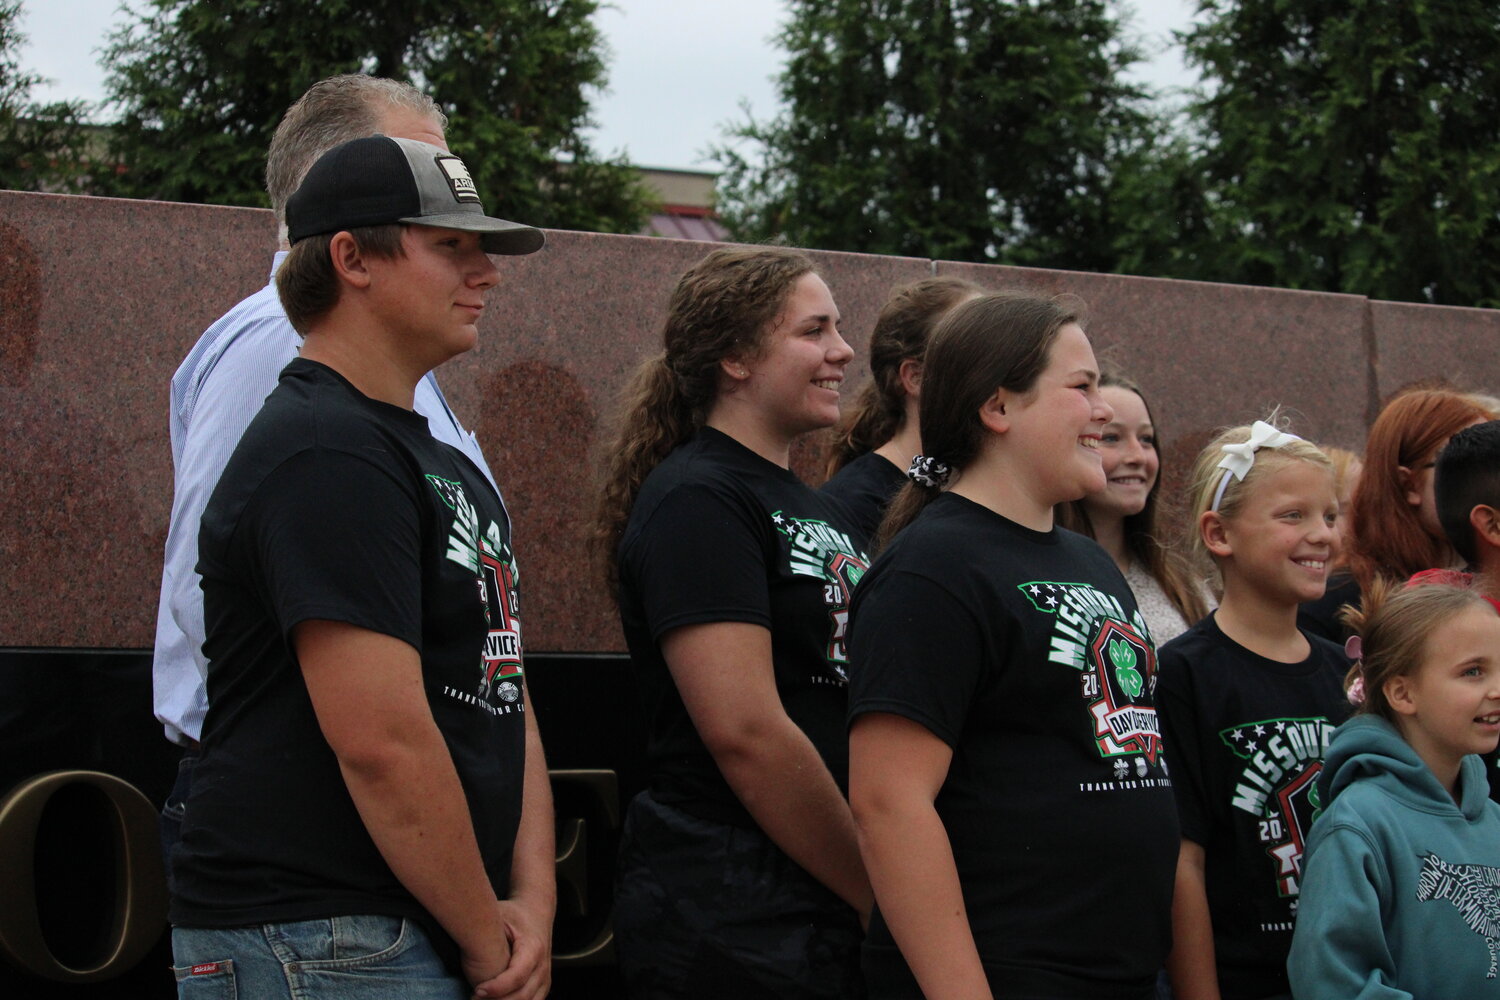 Madison Dent joins other members of Warren County 4-H groups for a photo after the ceremony.